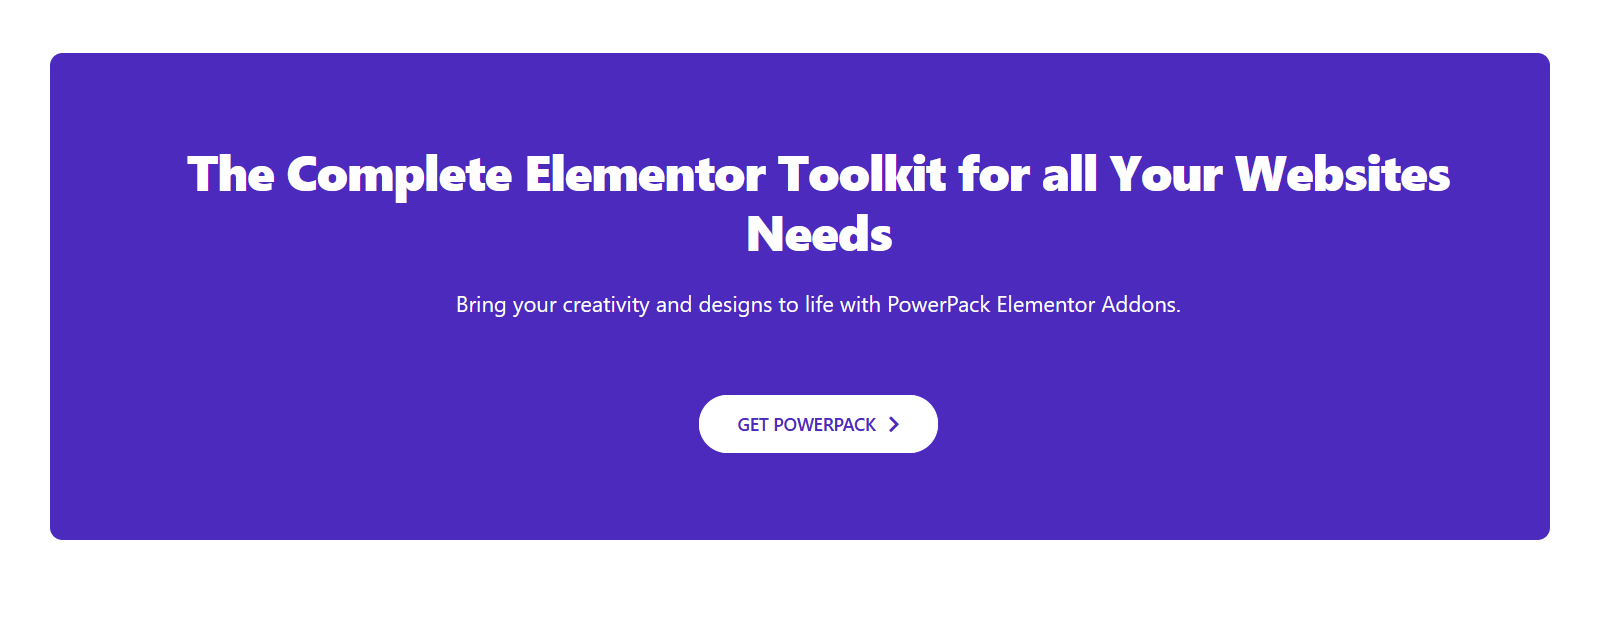 powerpack pro for elementor